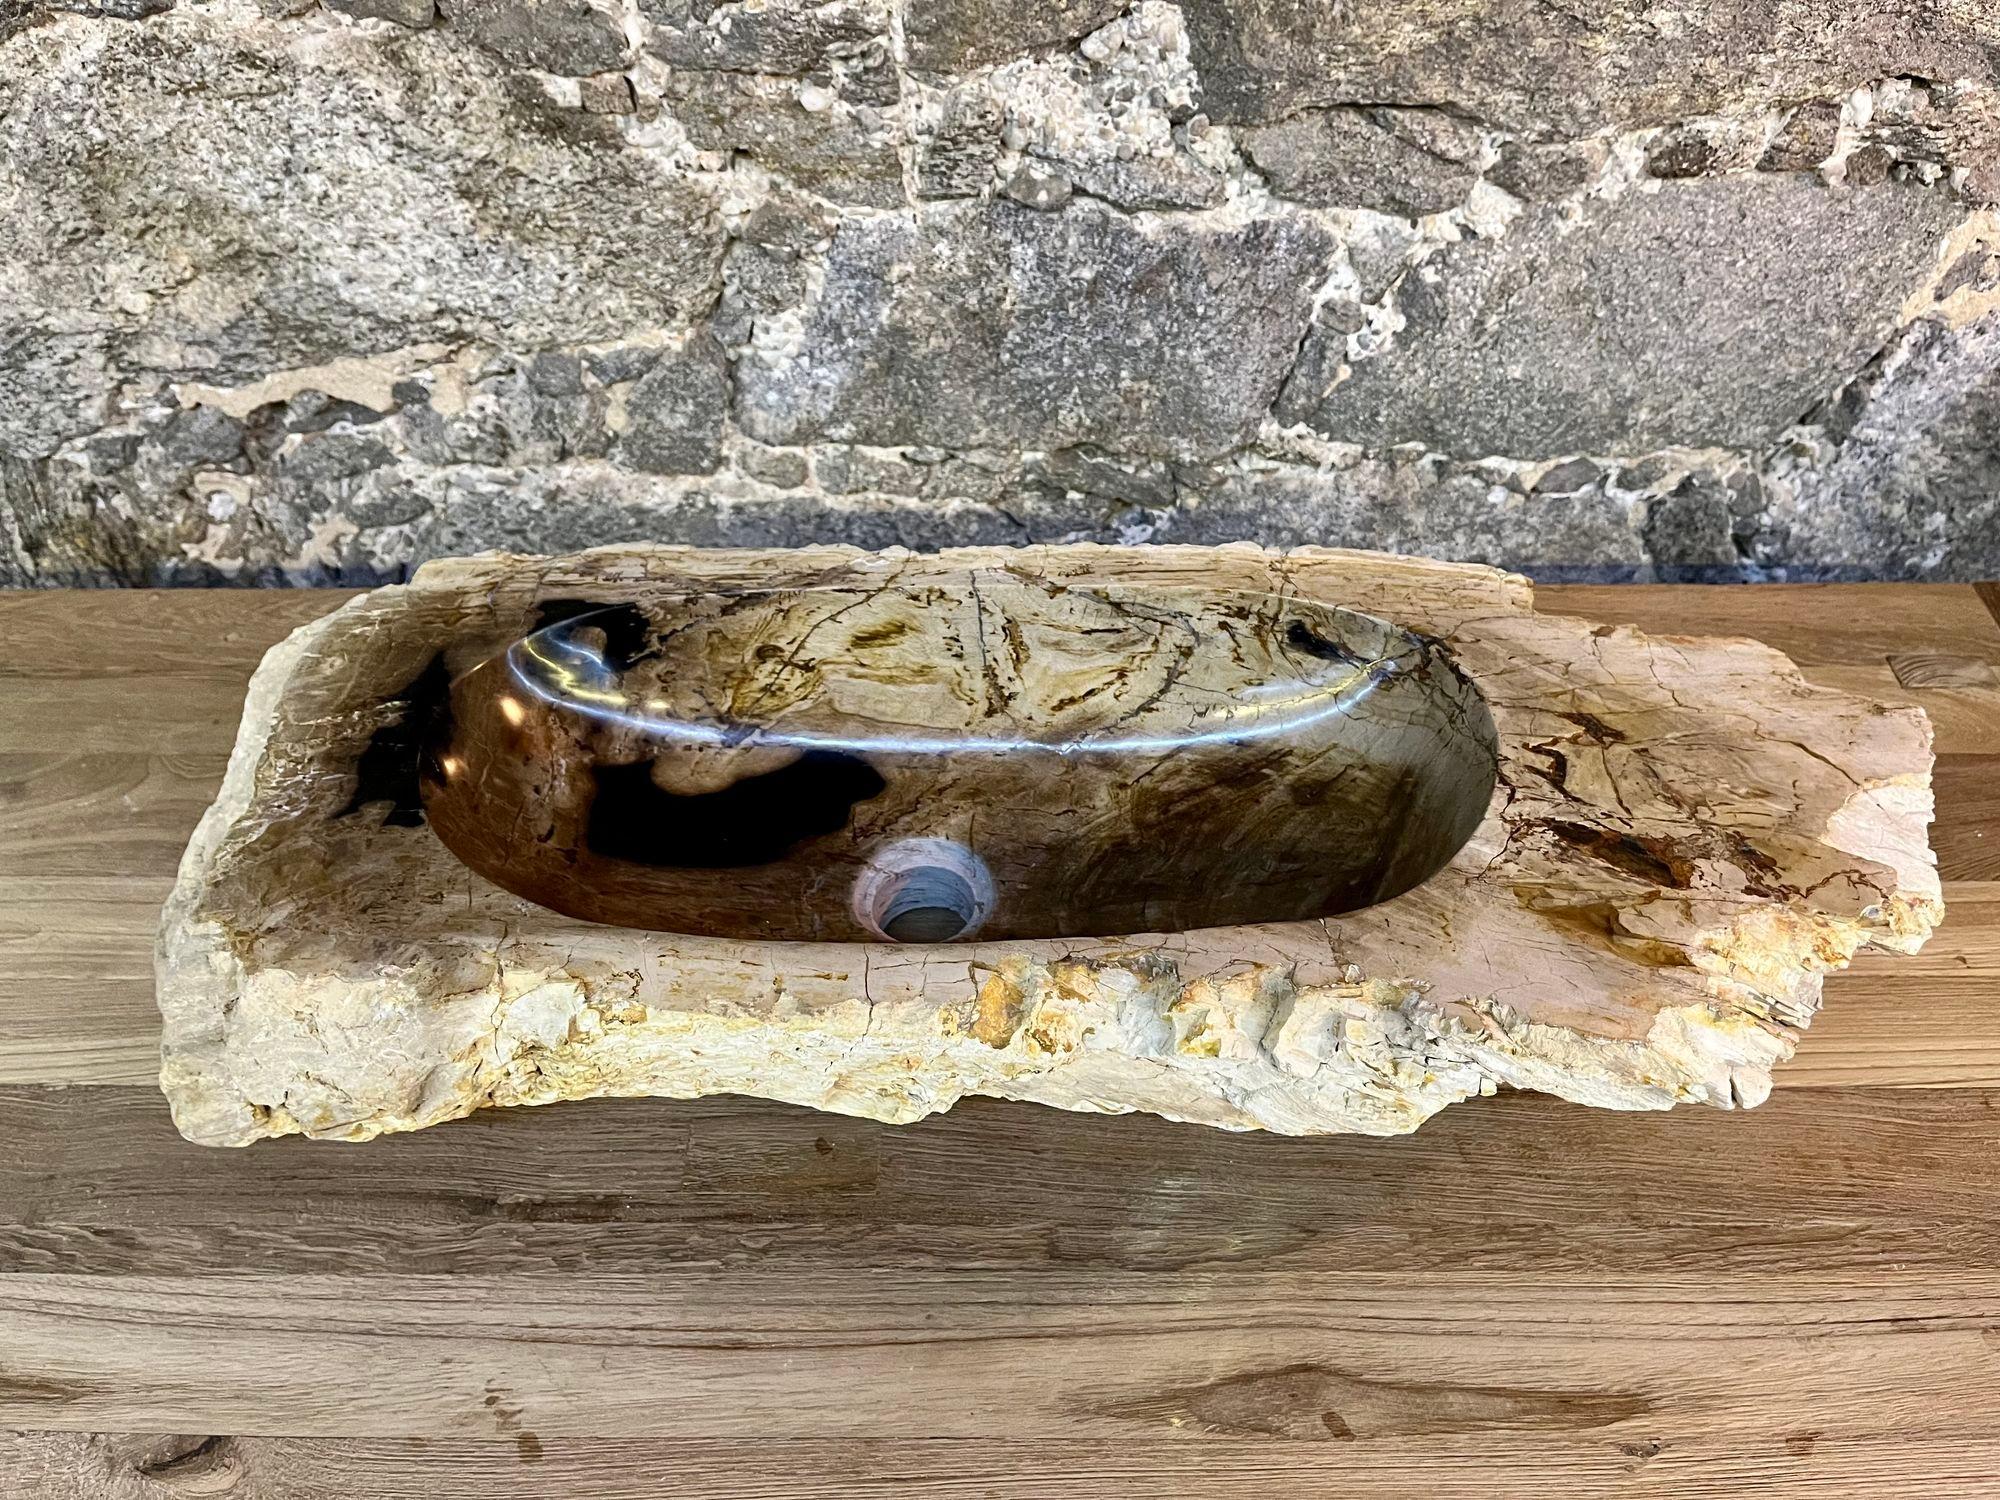 Amazing looking petrified wood sink in absolute top quality. This impressive single sink comes with a unique slim shape and charming natural coloration in beige, brown, grey and light yellow tones. The inside of the sink shows a polished surface